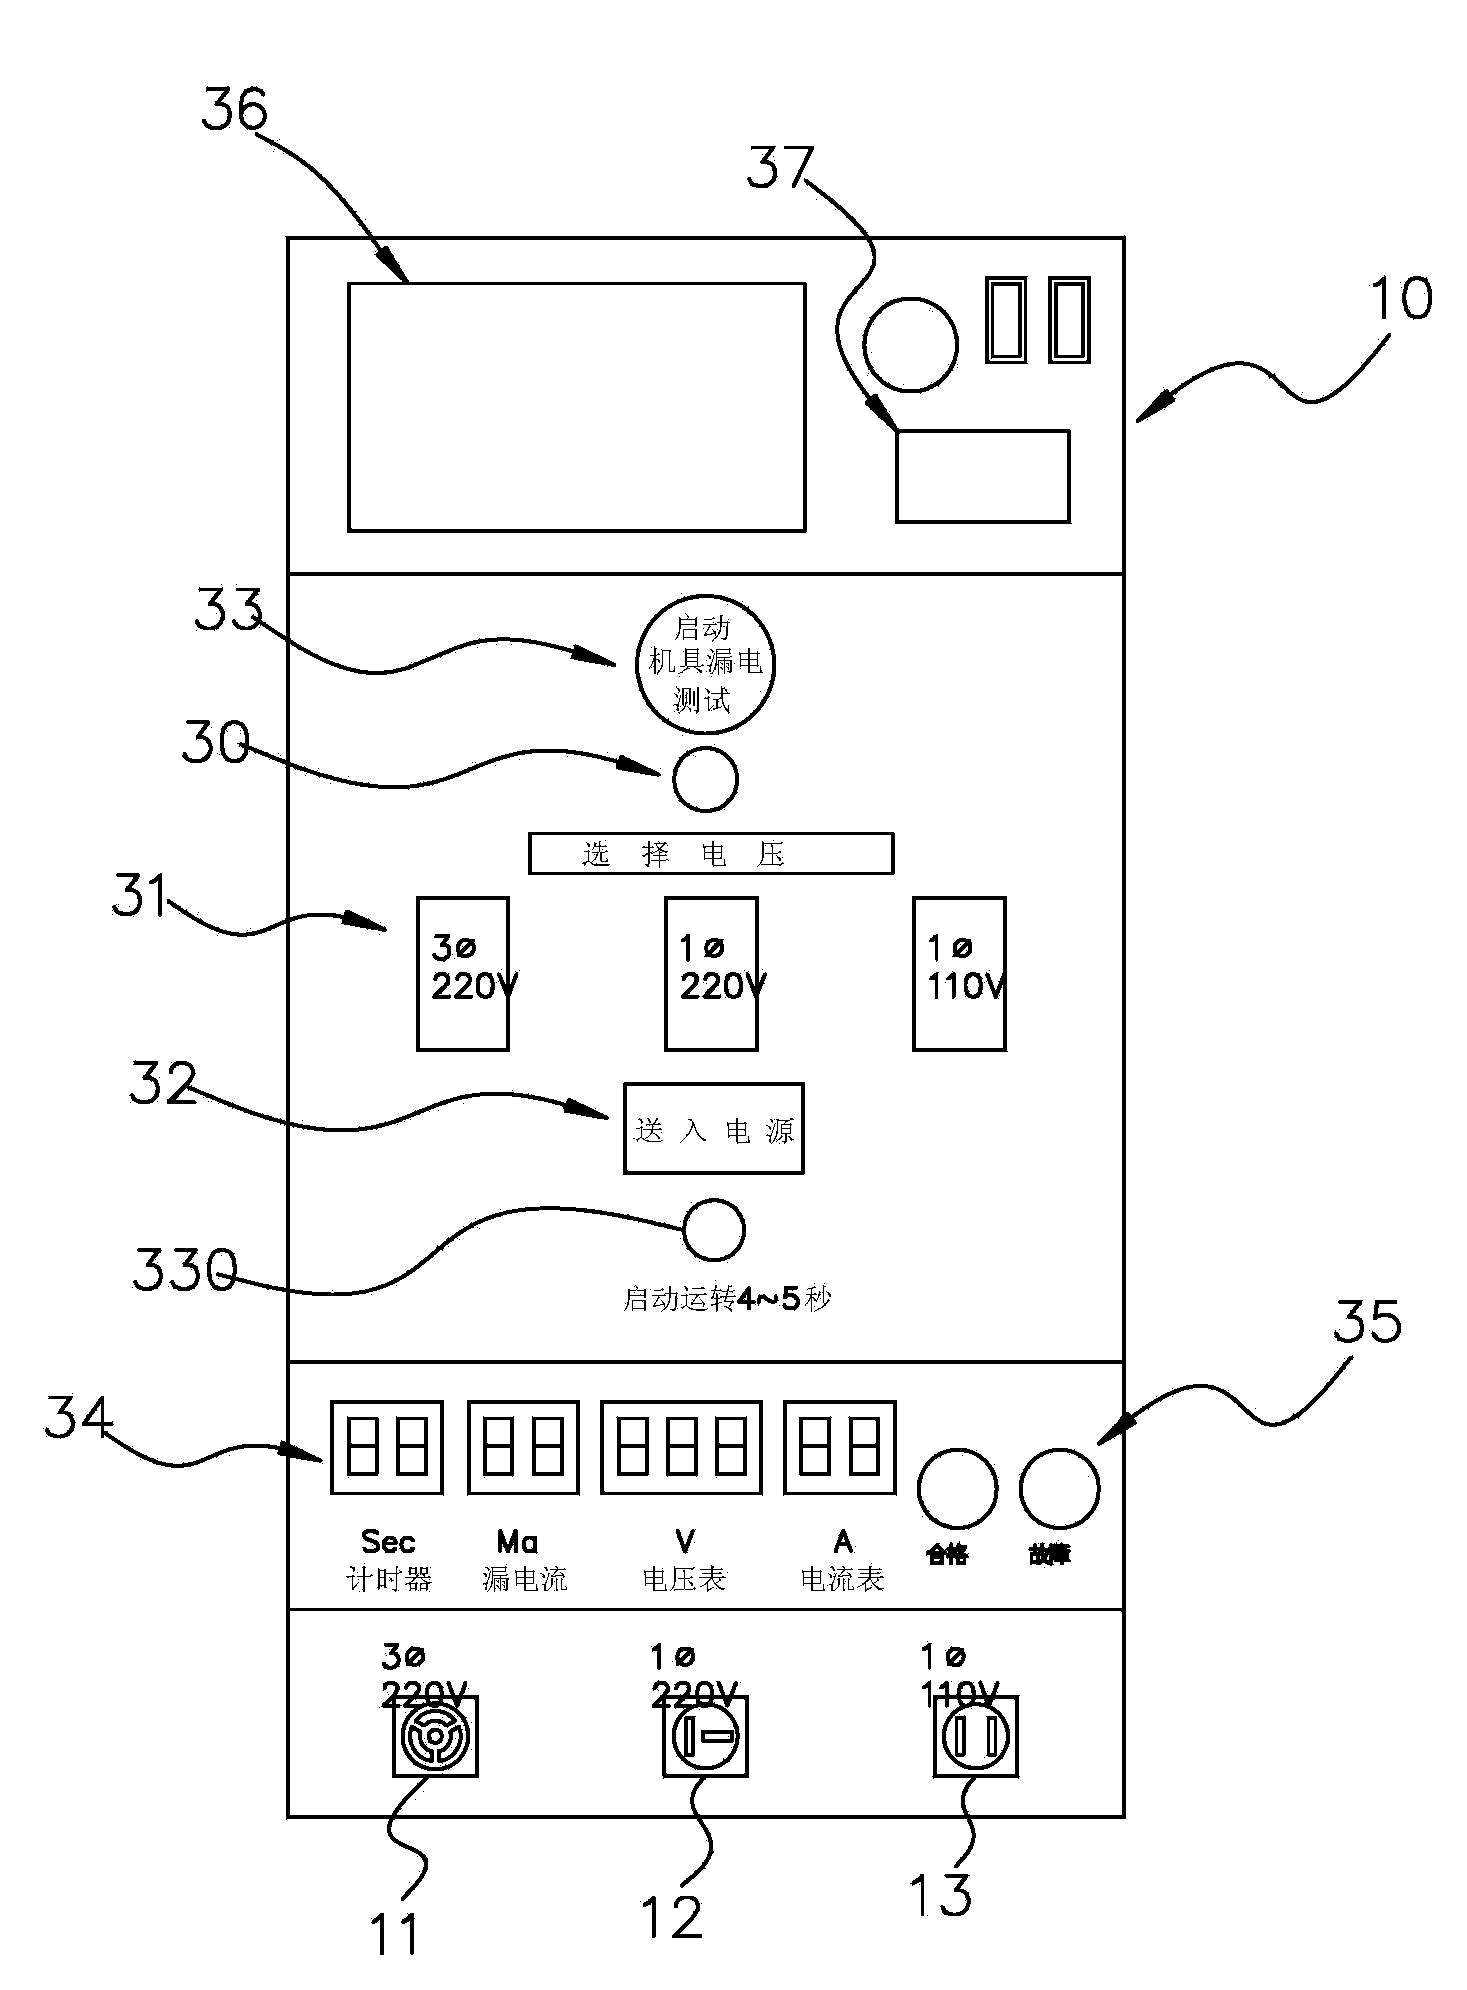 Quantifying system of electric leakage detecting device